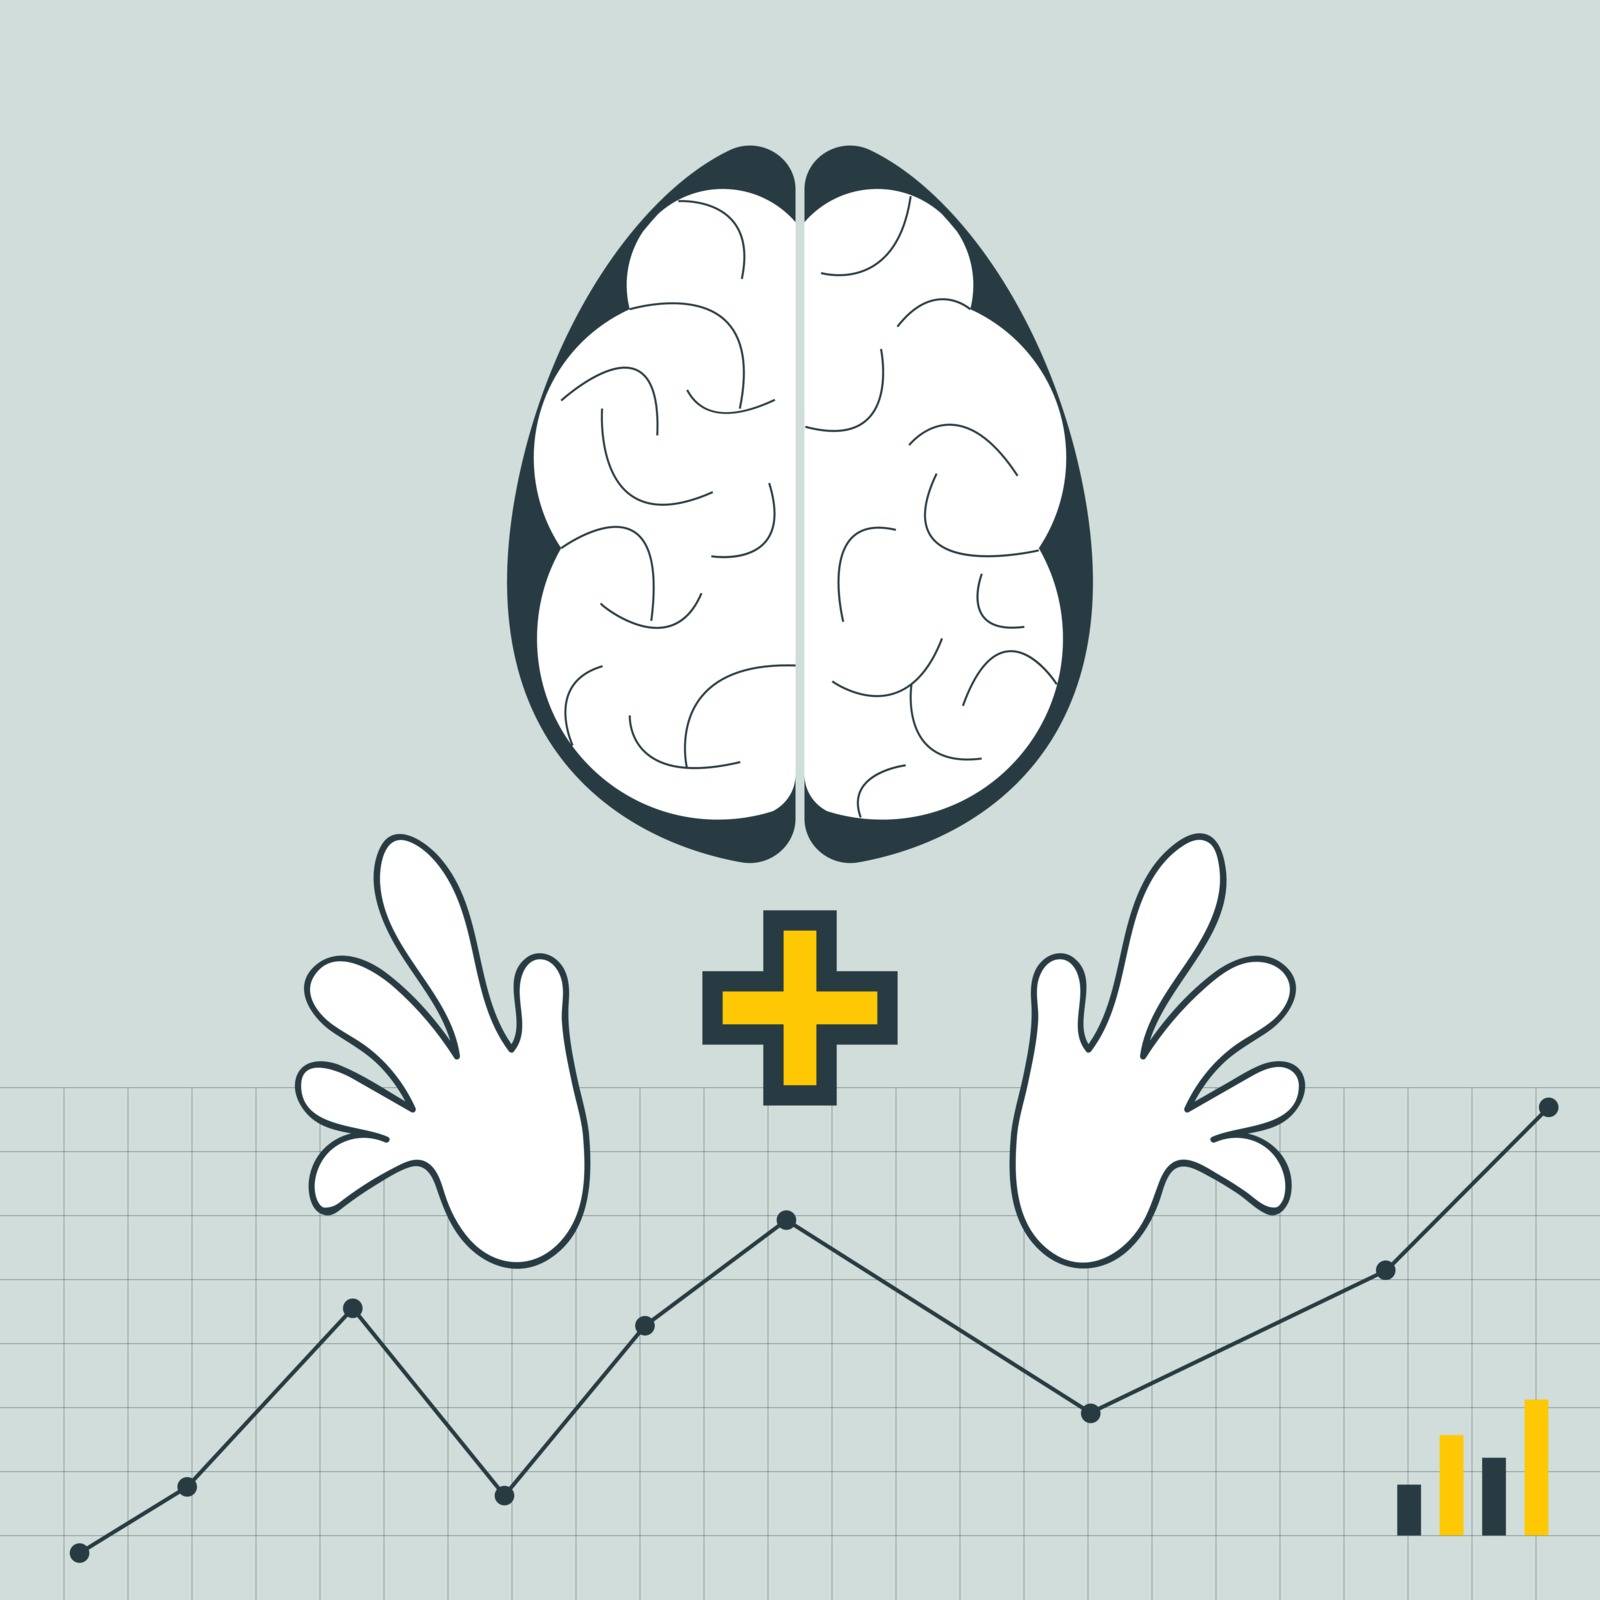 Brain and hand symbol on line graph background. Depiction of thinking and doing. Make it visible concept. Vector Illustration.